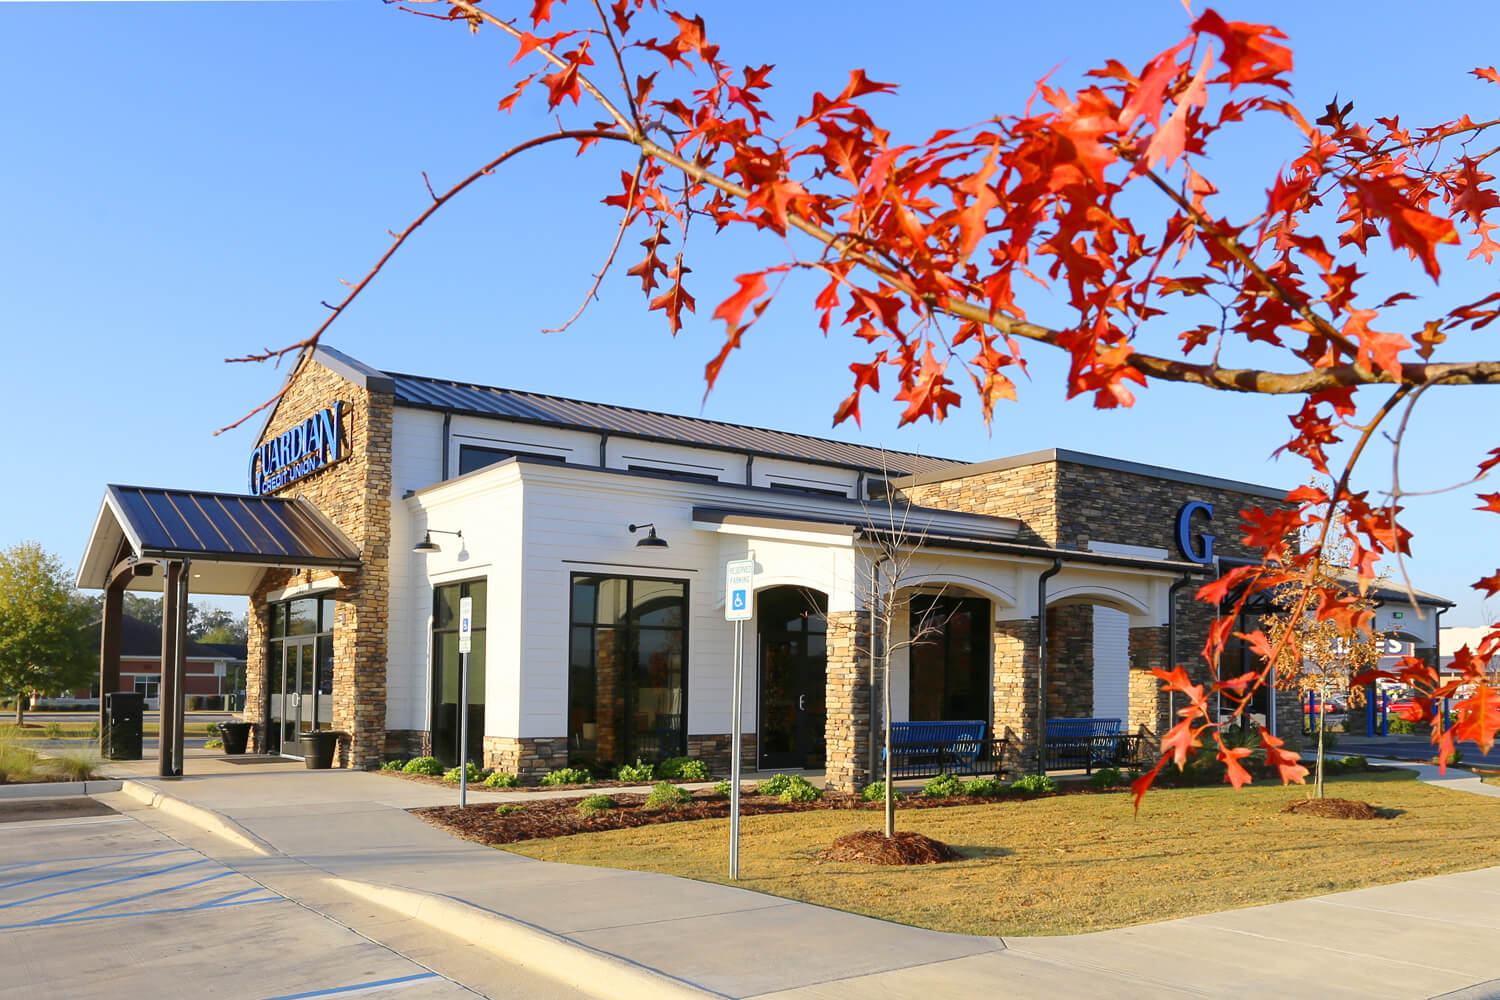 Guardian Credit Union - Wetumpka - View from Right Side - Designed by Foshee Architecture